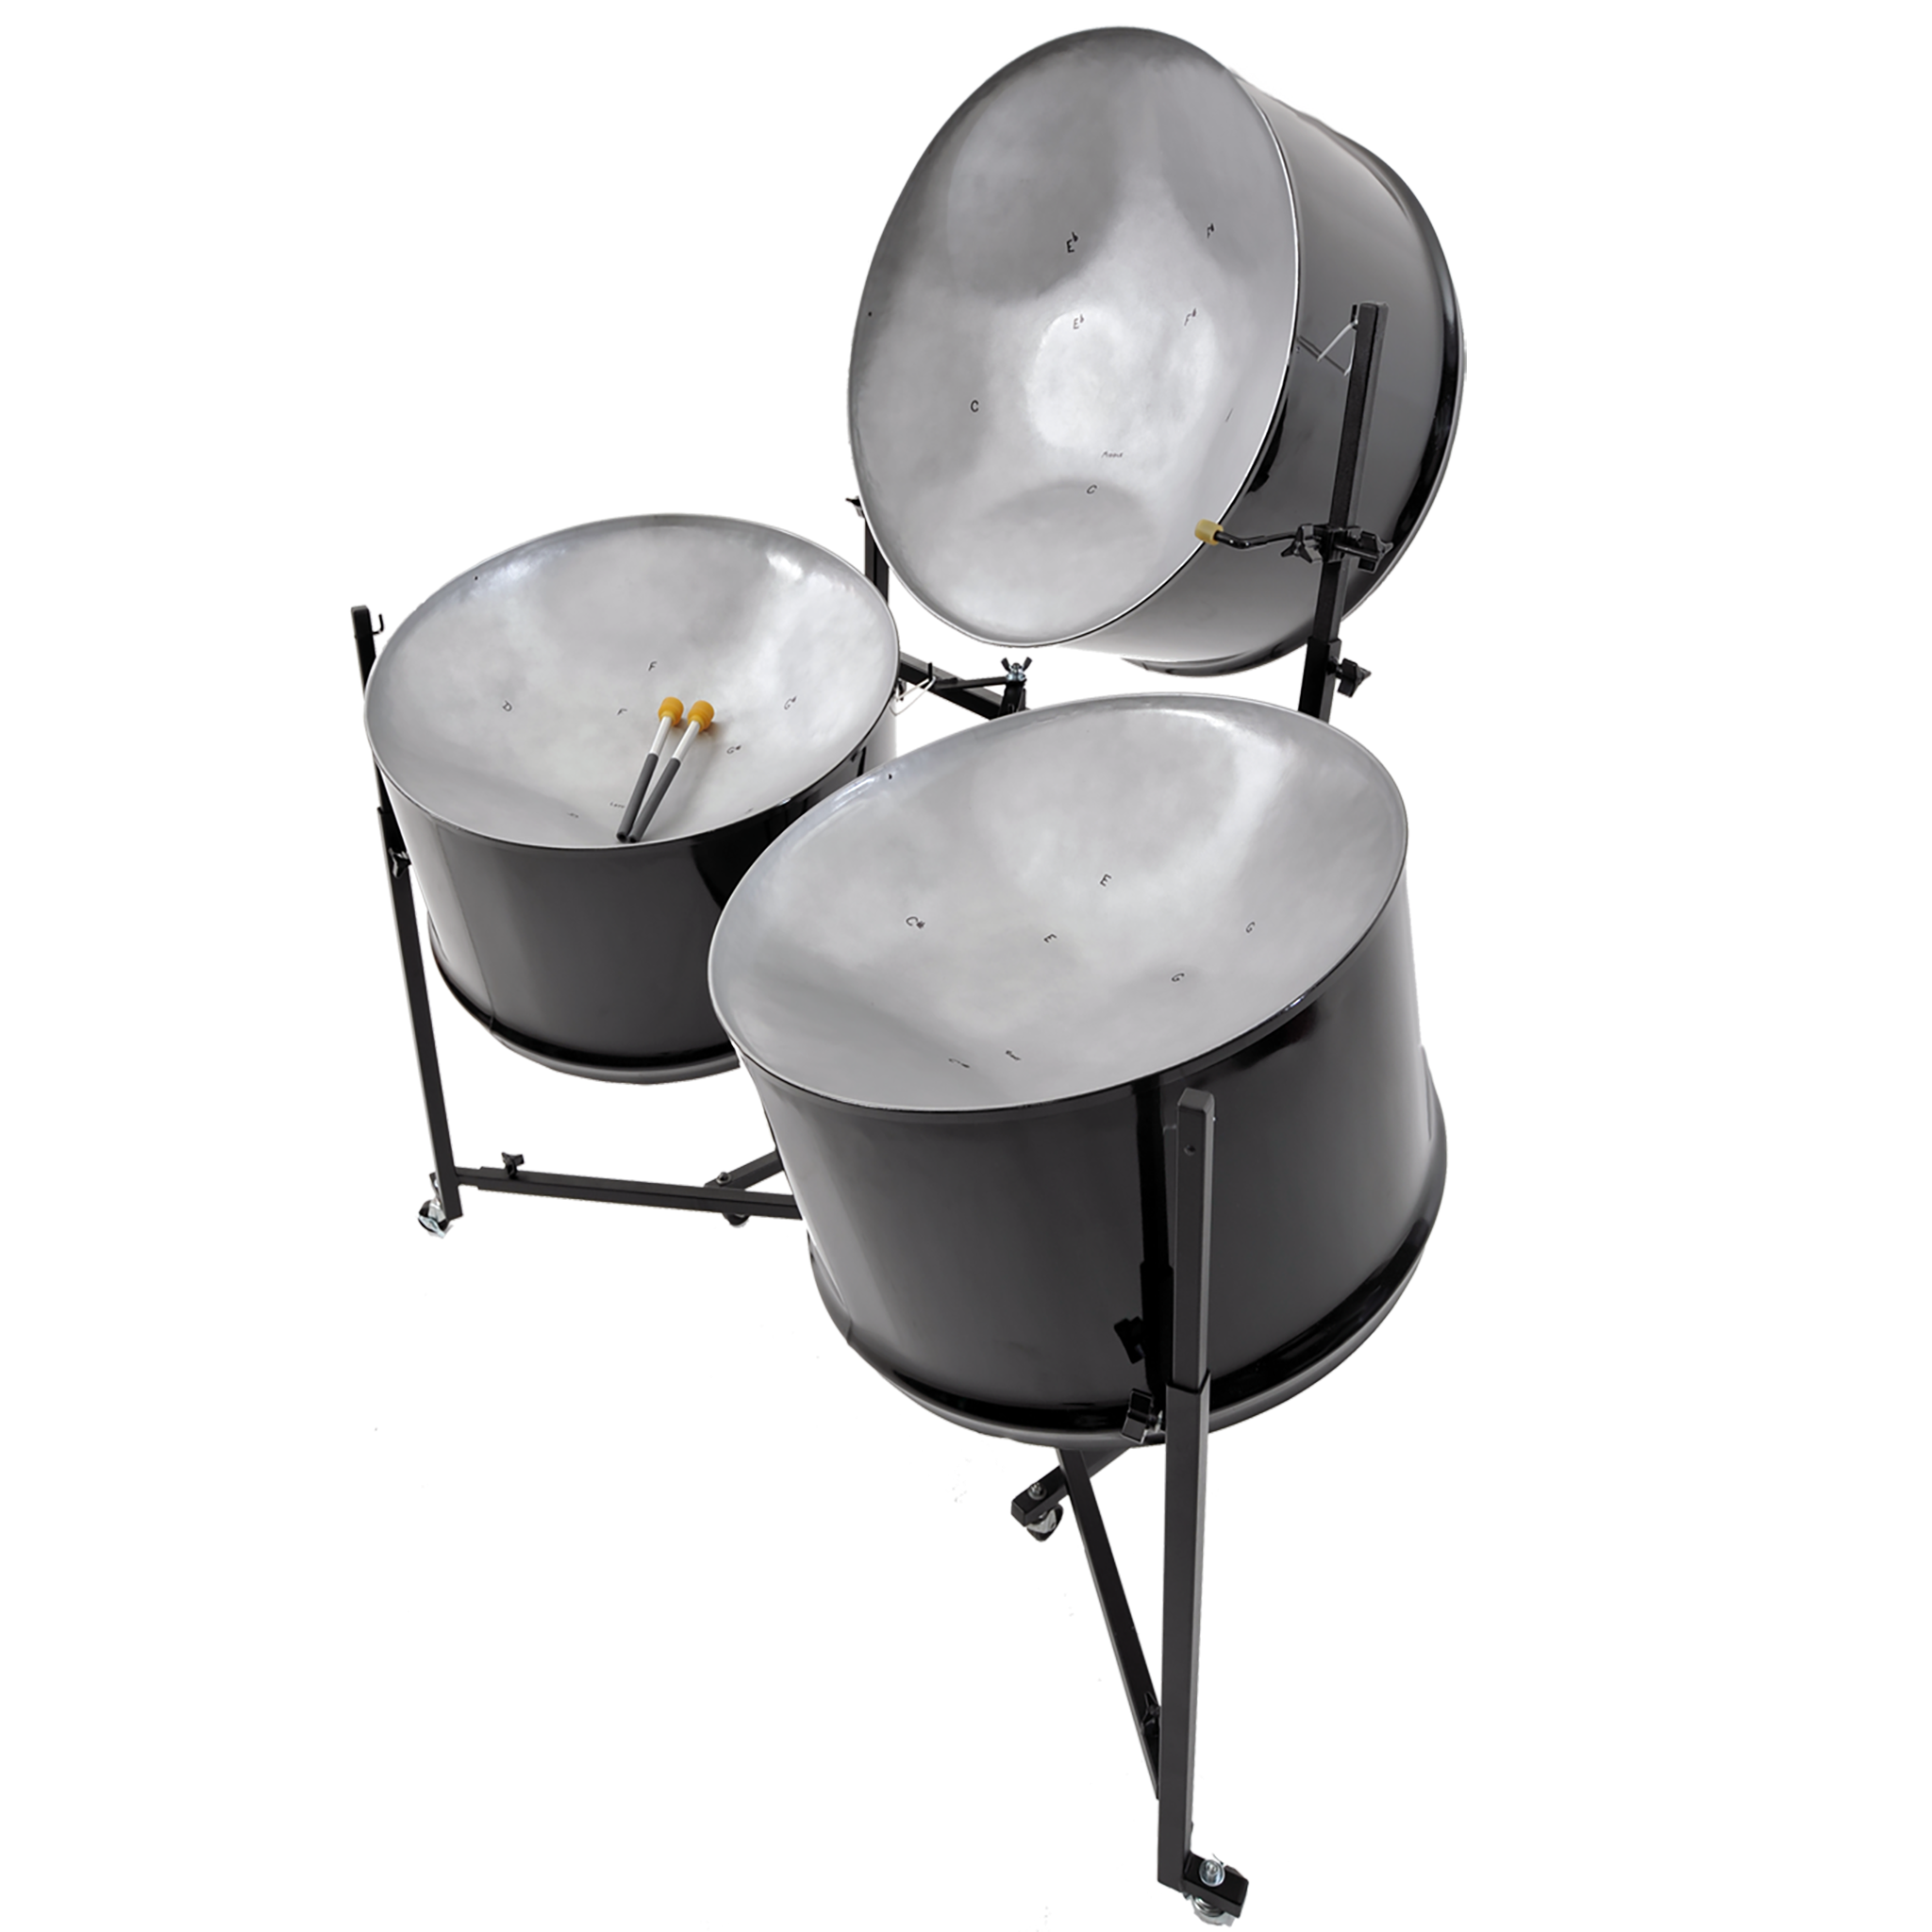 Percussion Plus Import Series triple cello steel pans - painted finish